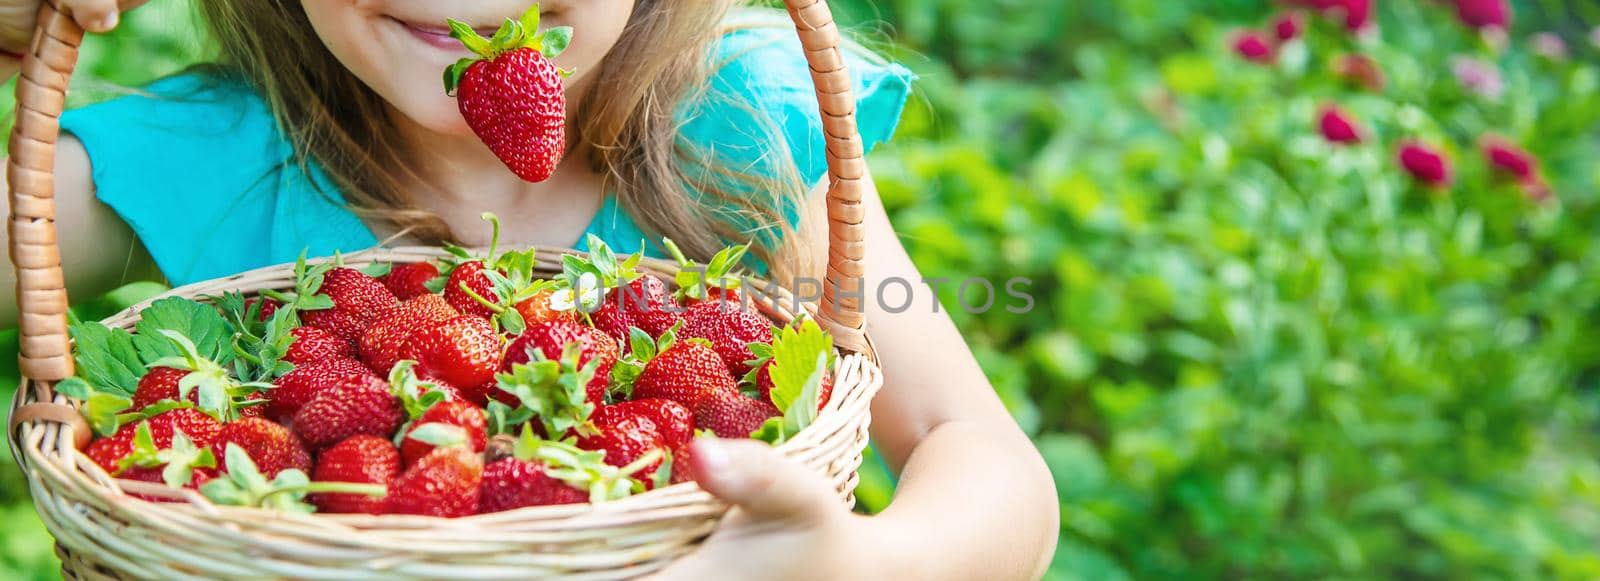 The child collects strawberries in the garden. Selective focus.